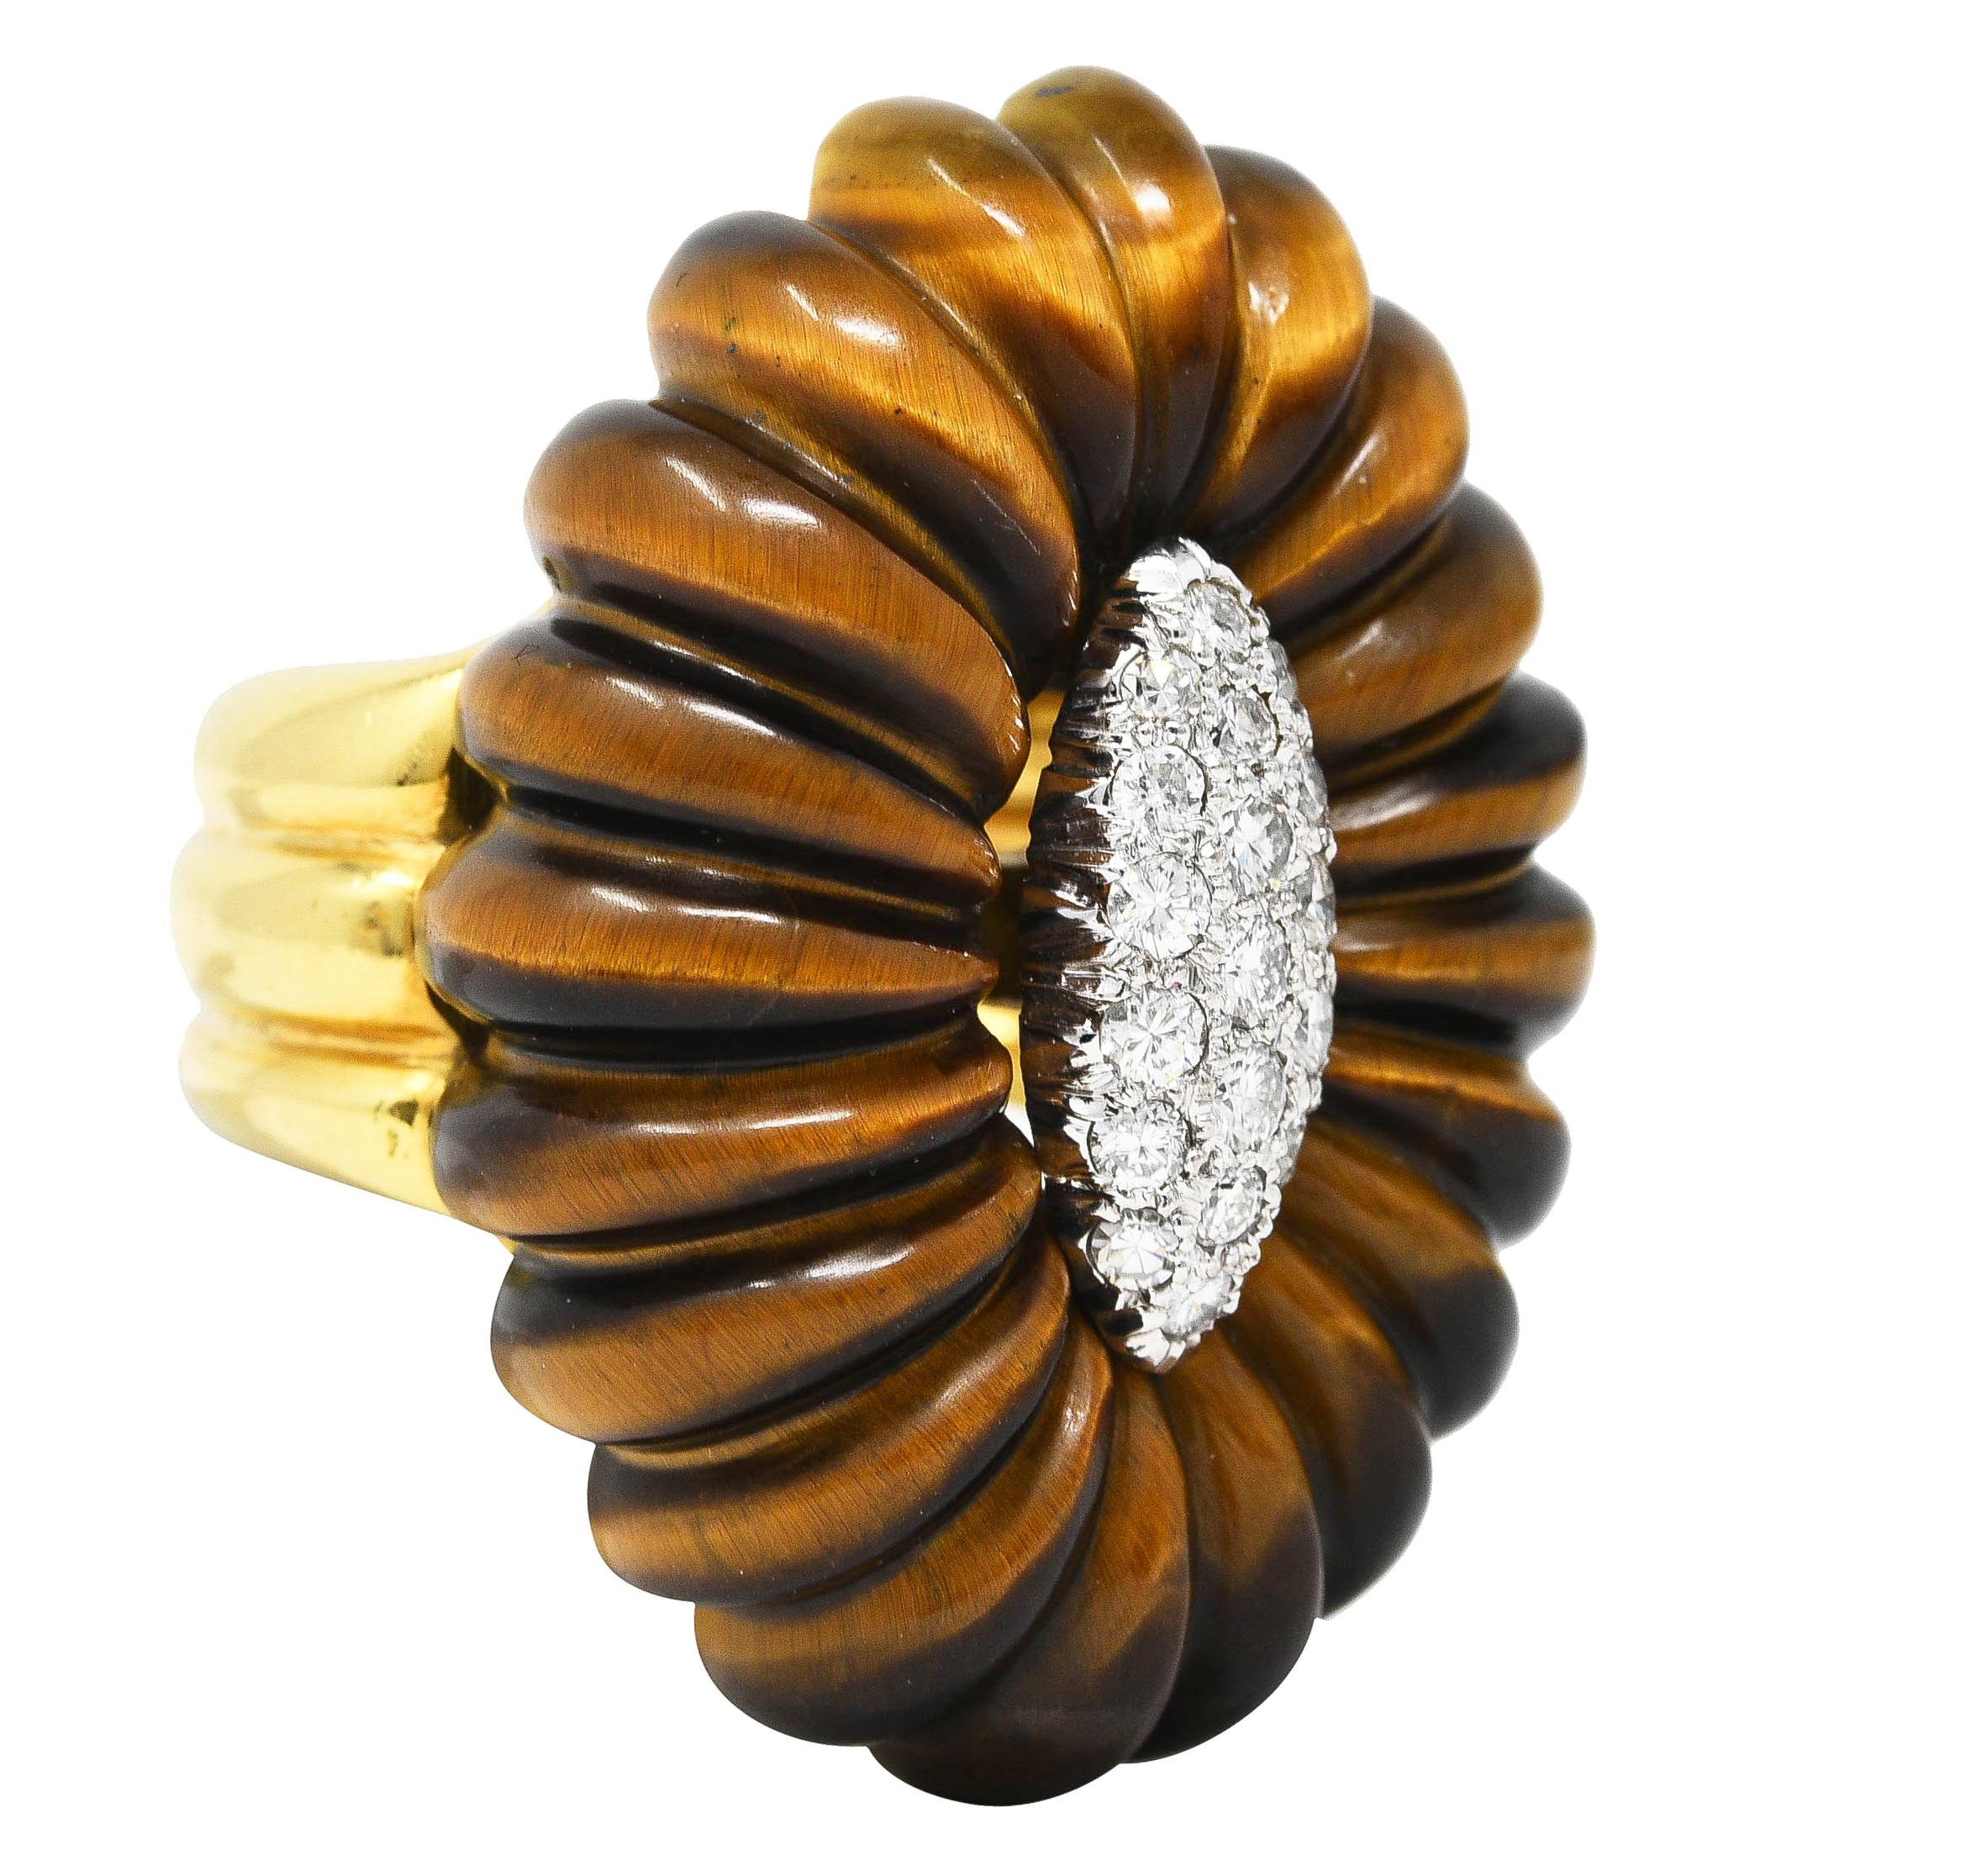 Centering round brilliant cut diamonds pave set in a navette shaped white gold form. Weighing approximately 0.54 carat total - G/H color with VS2 clarity/ Accented by a surround of carved tiger's eye quartz fluting. Opaque brown to yellowish orange